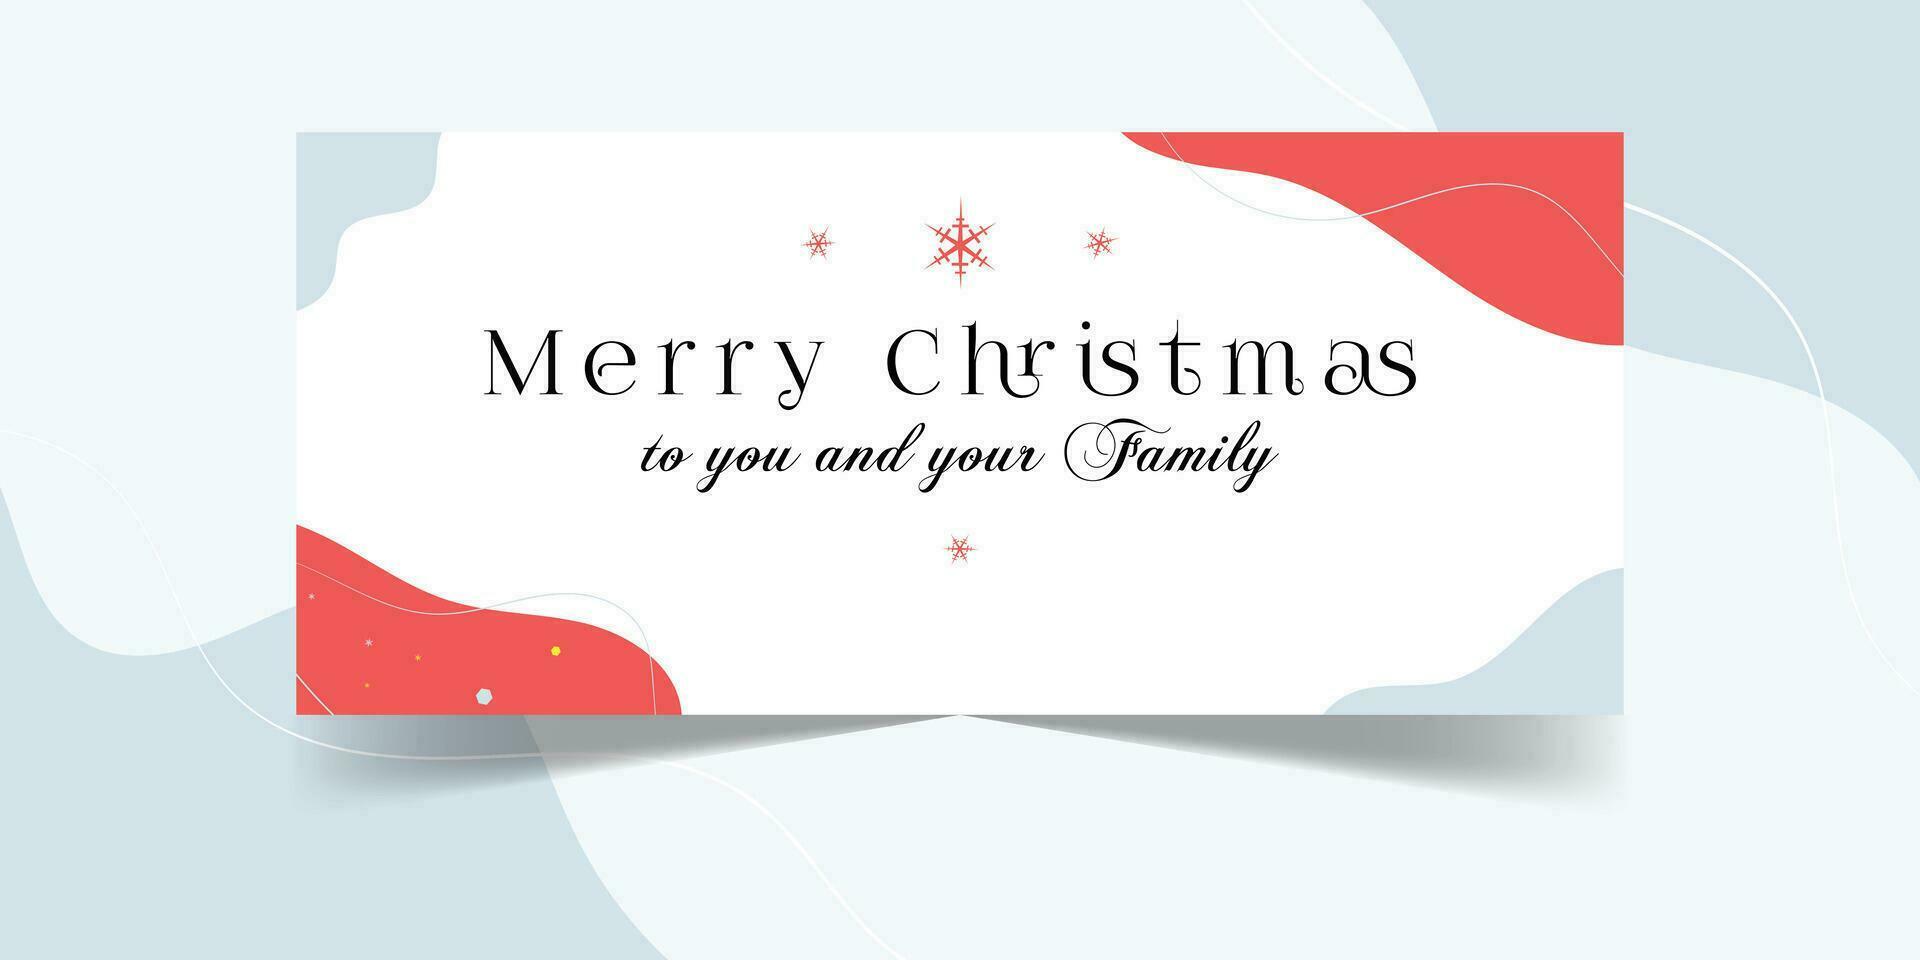 Christmas cover page timeline web ad banner template. Horizontal Christmas poster, greeting cards, headers, website vector